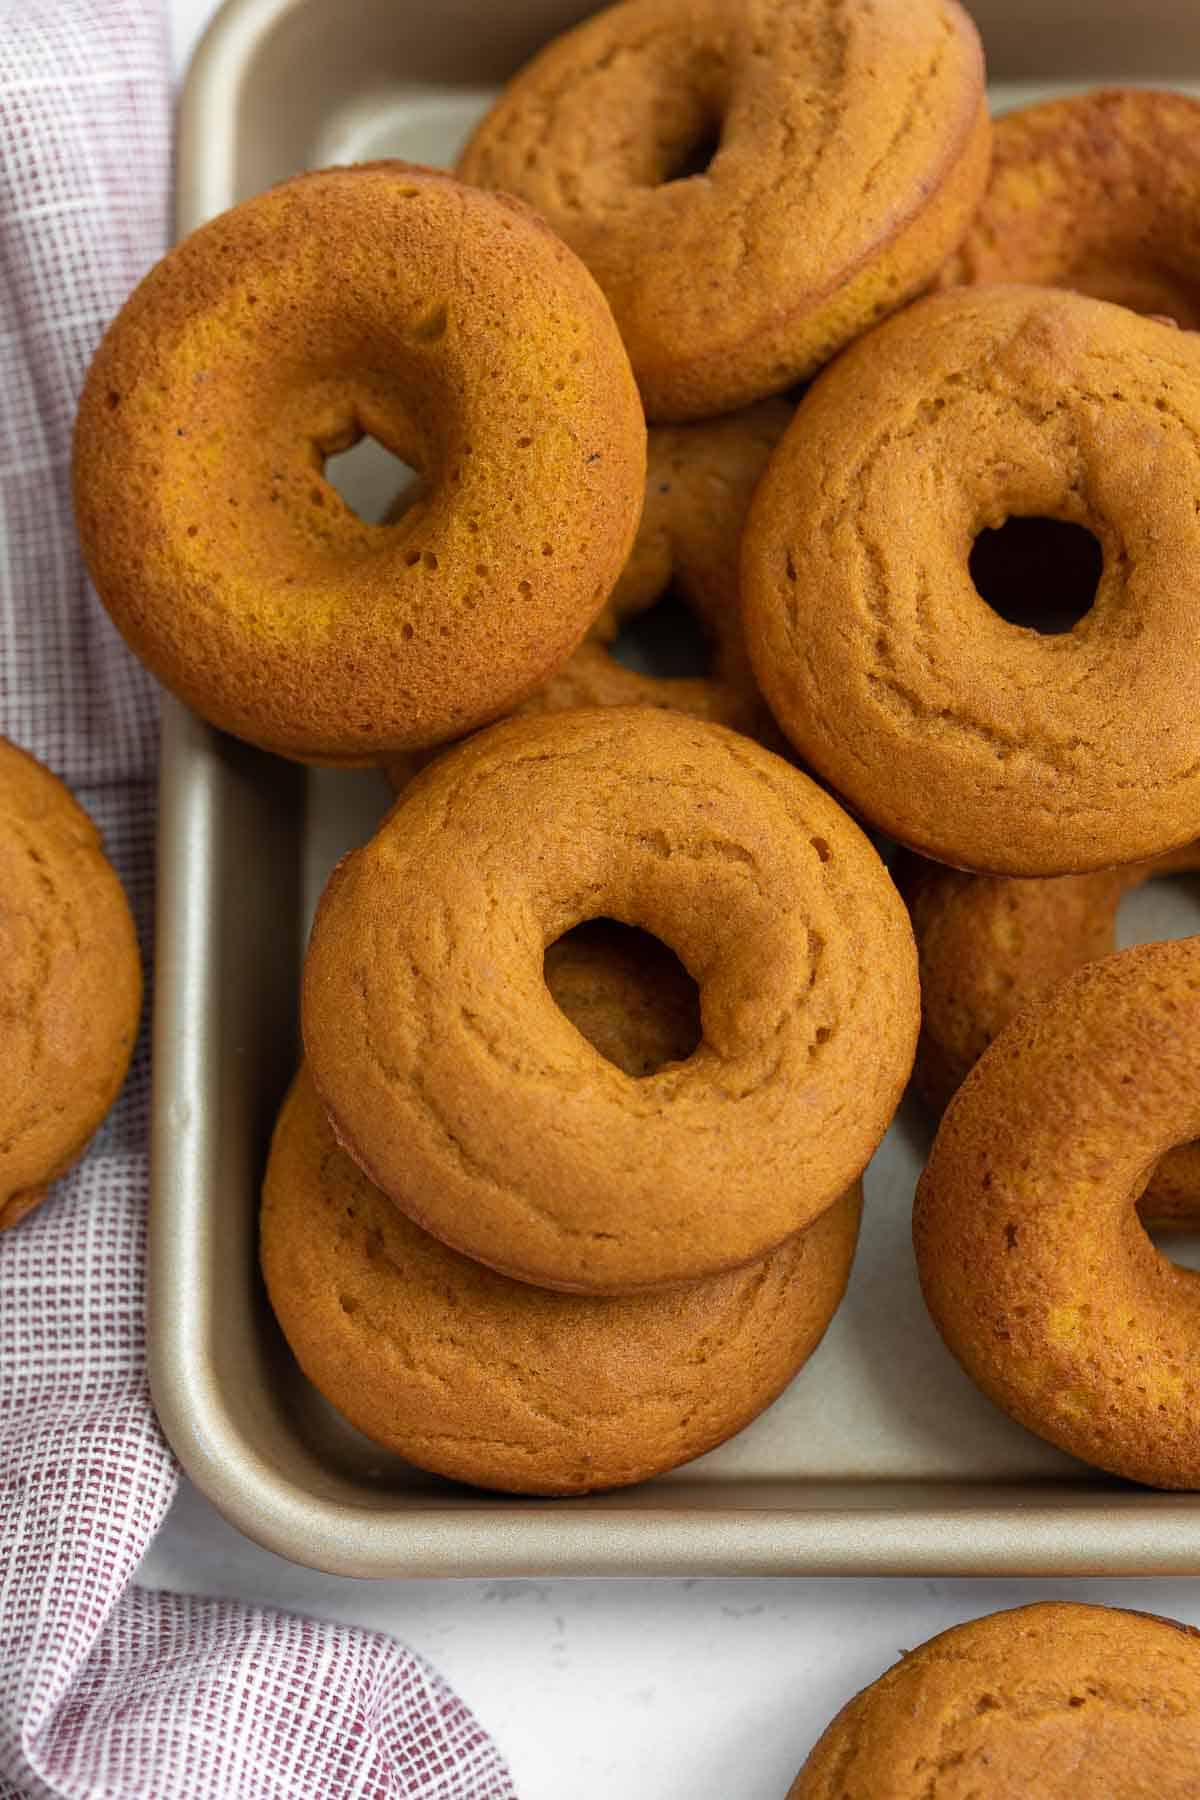 baked pumpkin donuts on baking sheet before being glazed